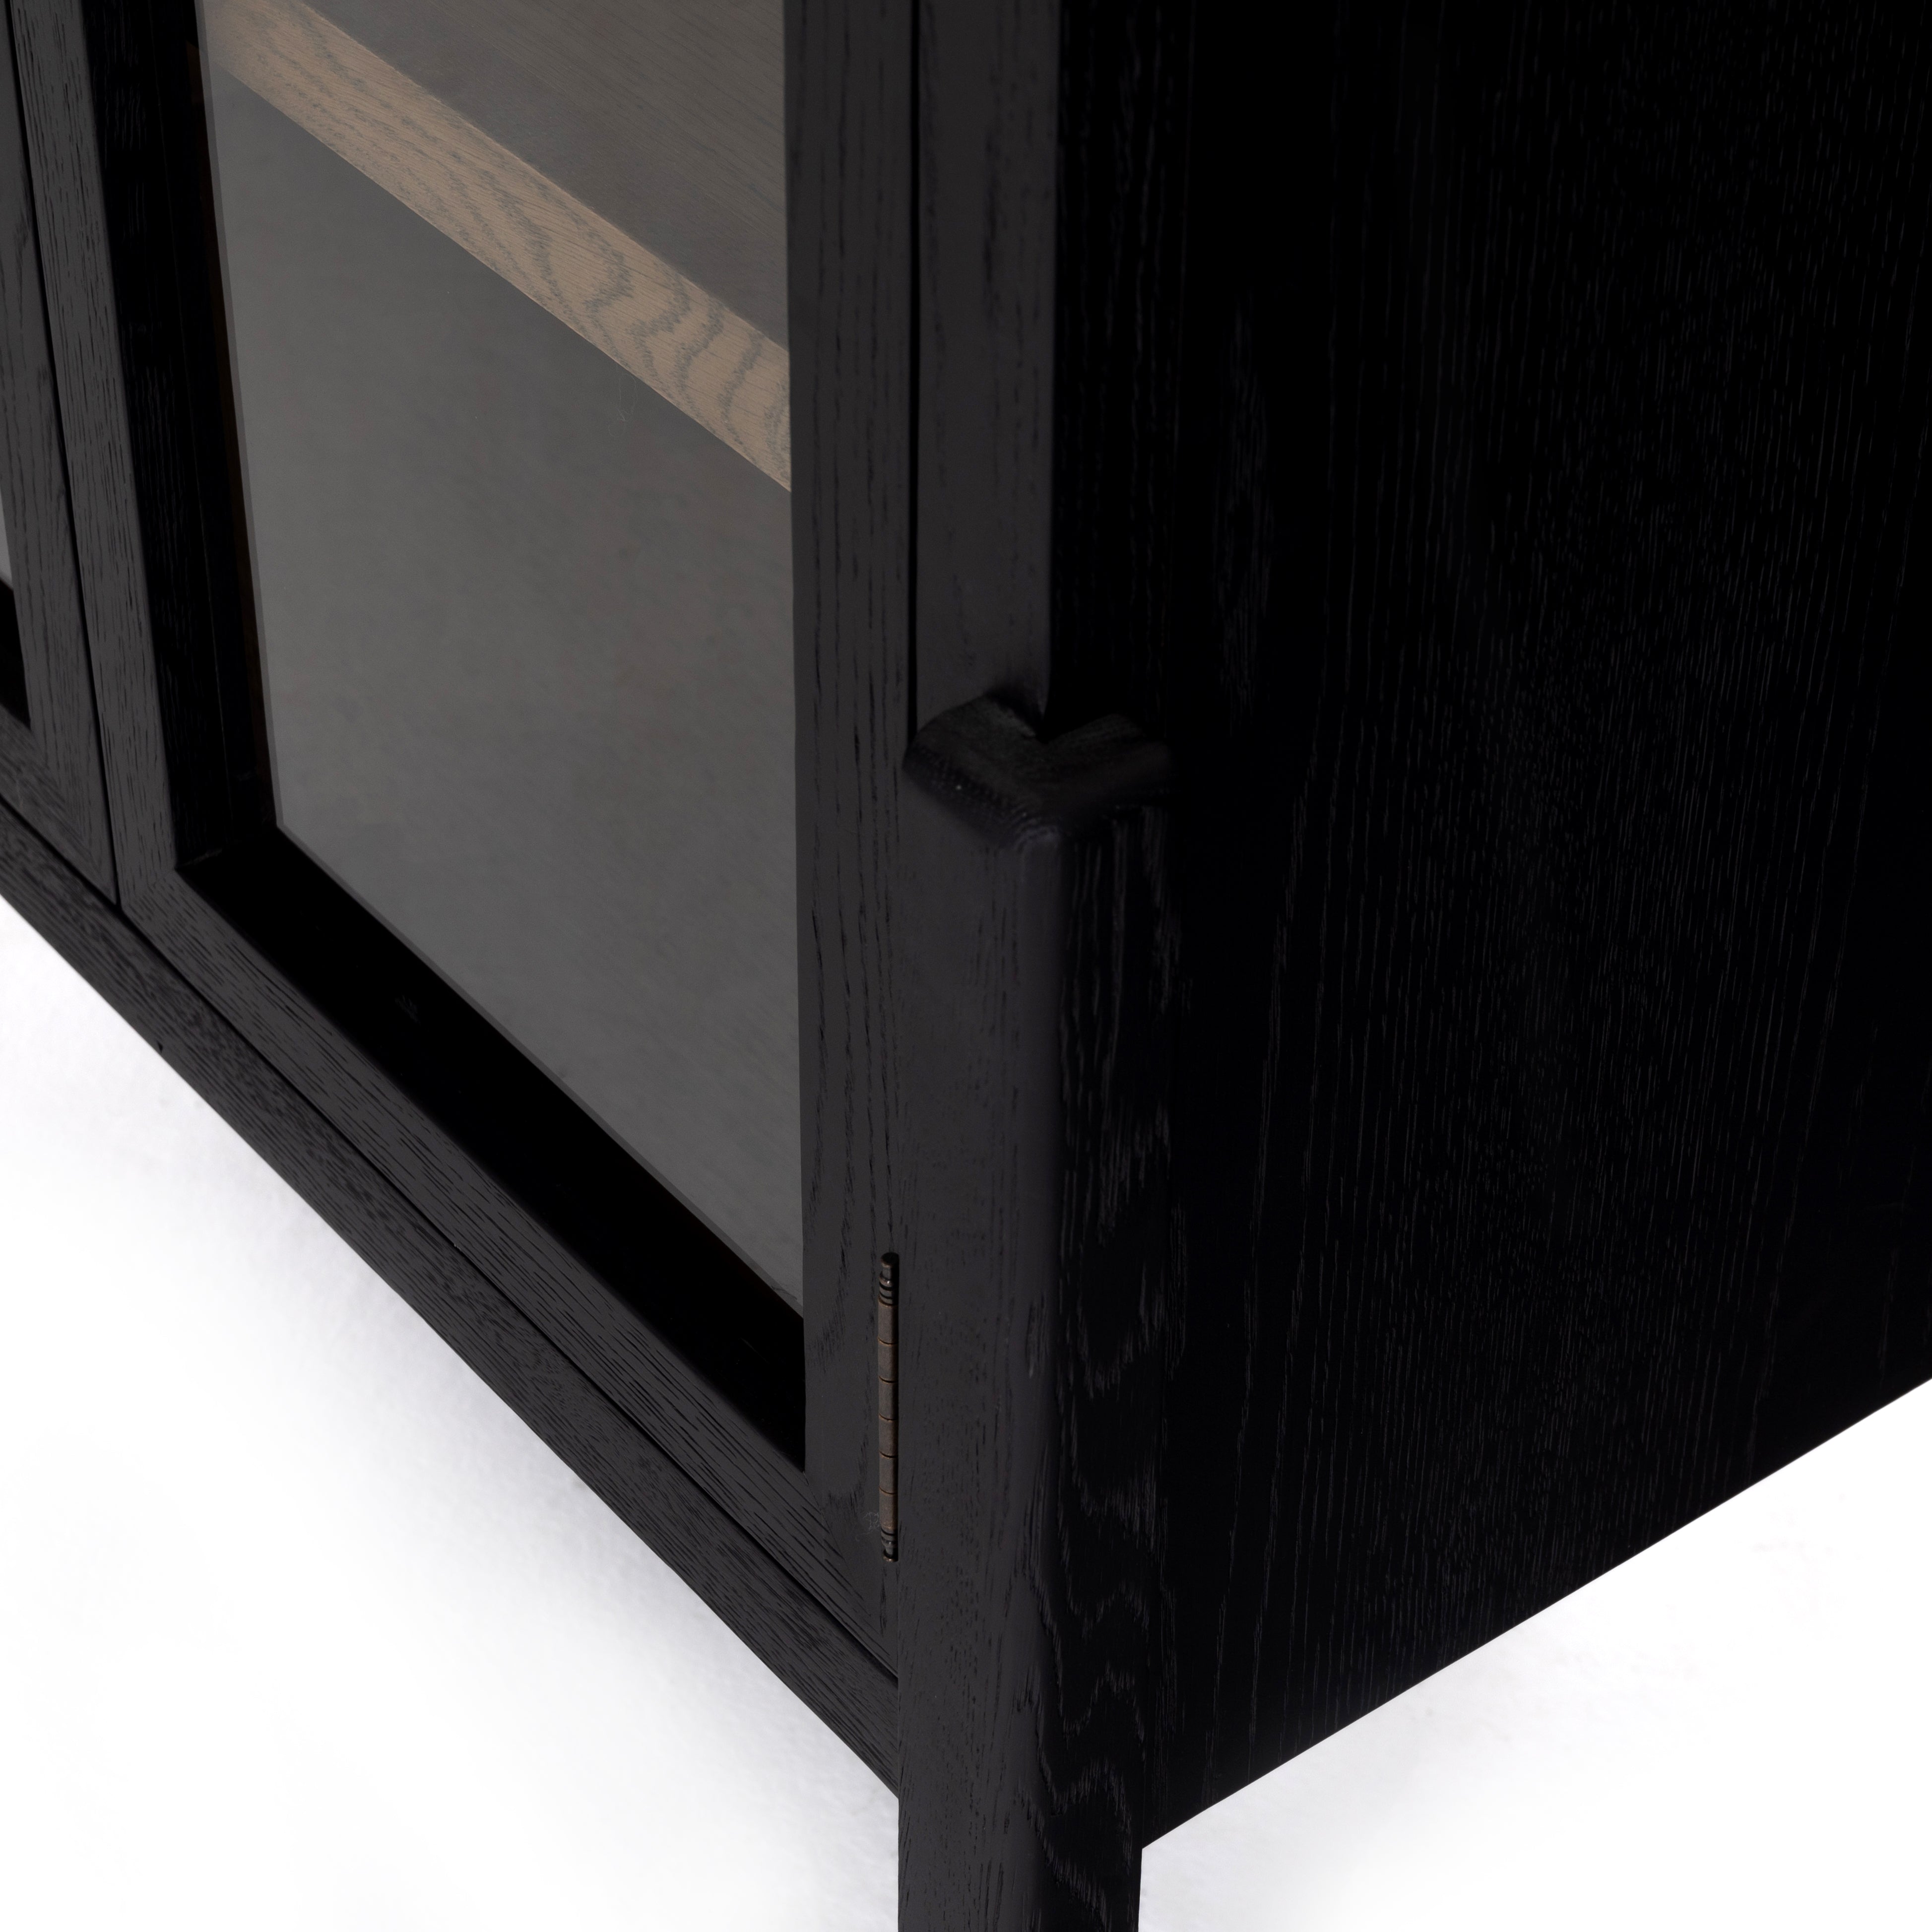 Drifted Black Oak and Drifted Oak with Tempered Glass and Antique Brass Iron | Tolle Cabinet | Valley Ridge Furniture